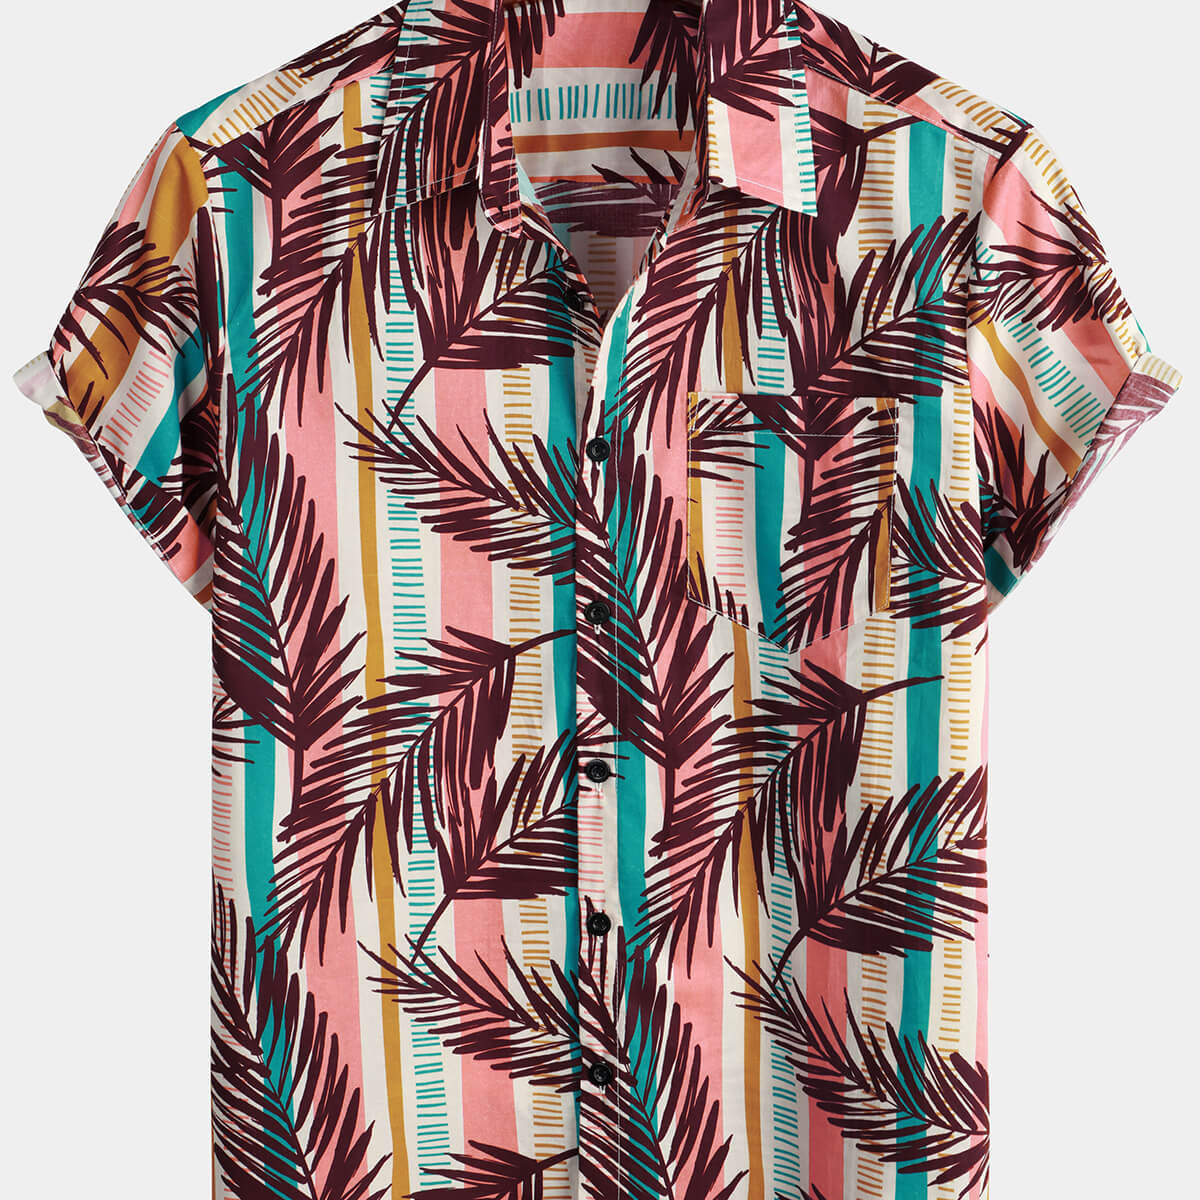 Men's Striped Tropical Floral Print Short Sleeve Button Up Cotton Summer Holiday Shirt